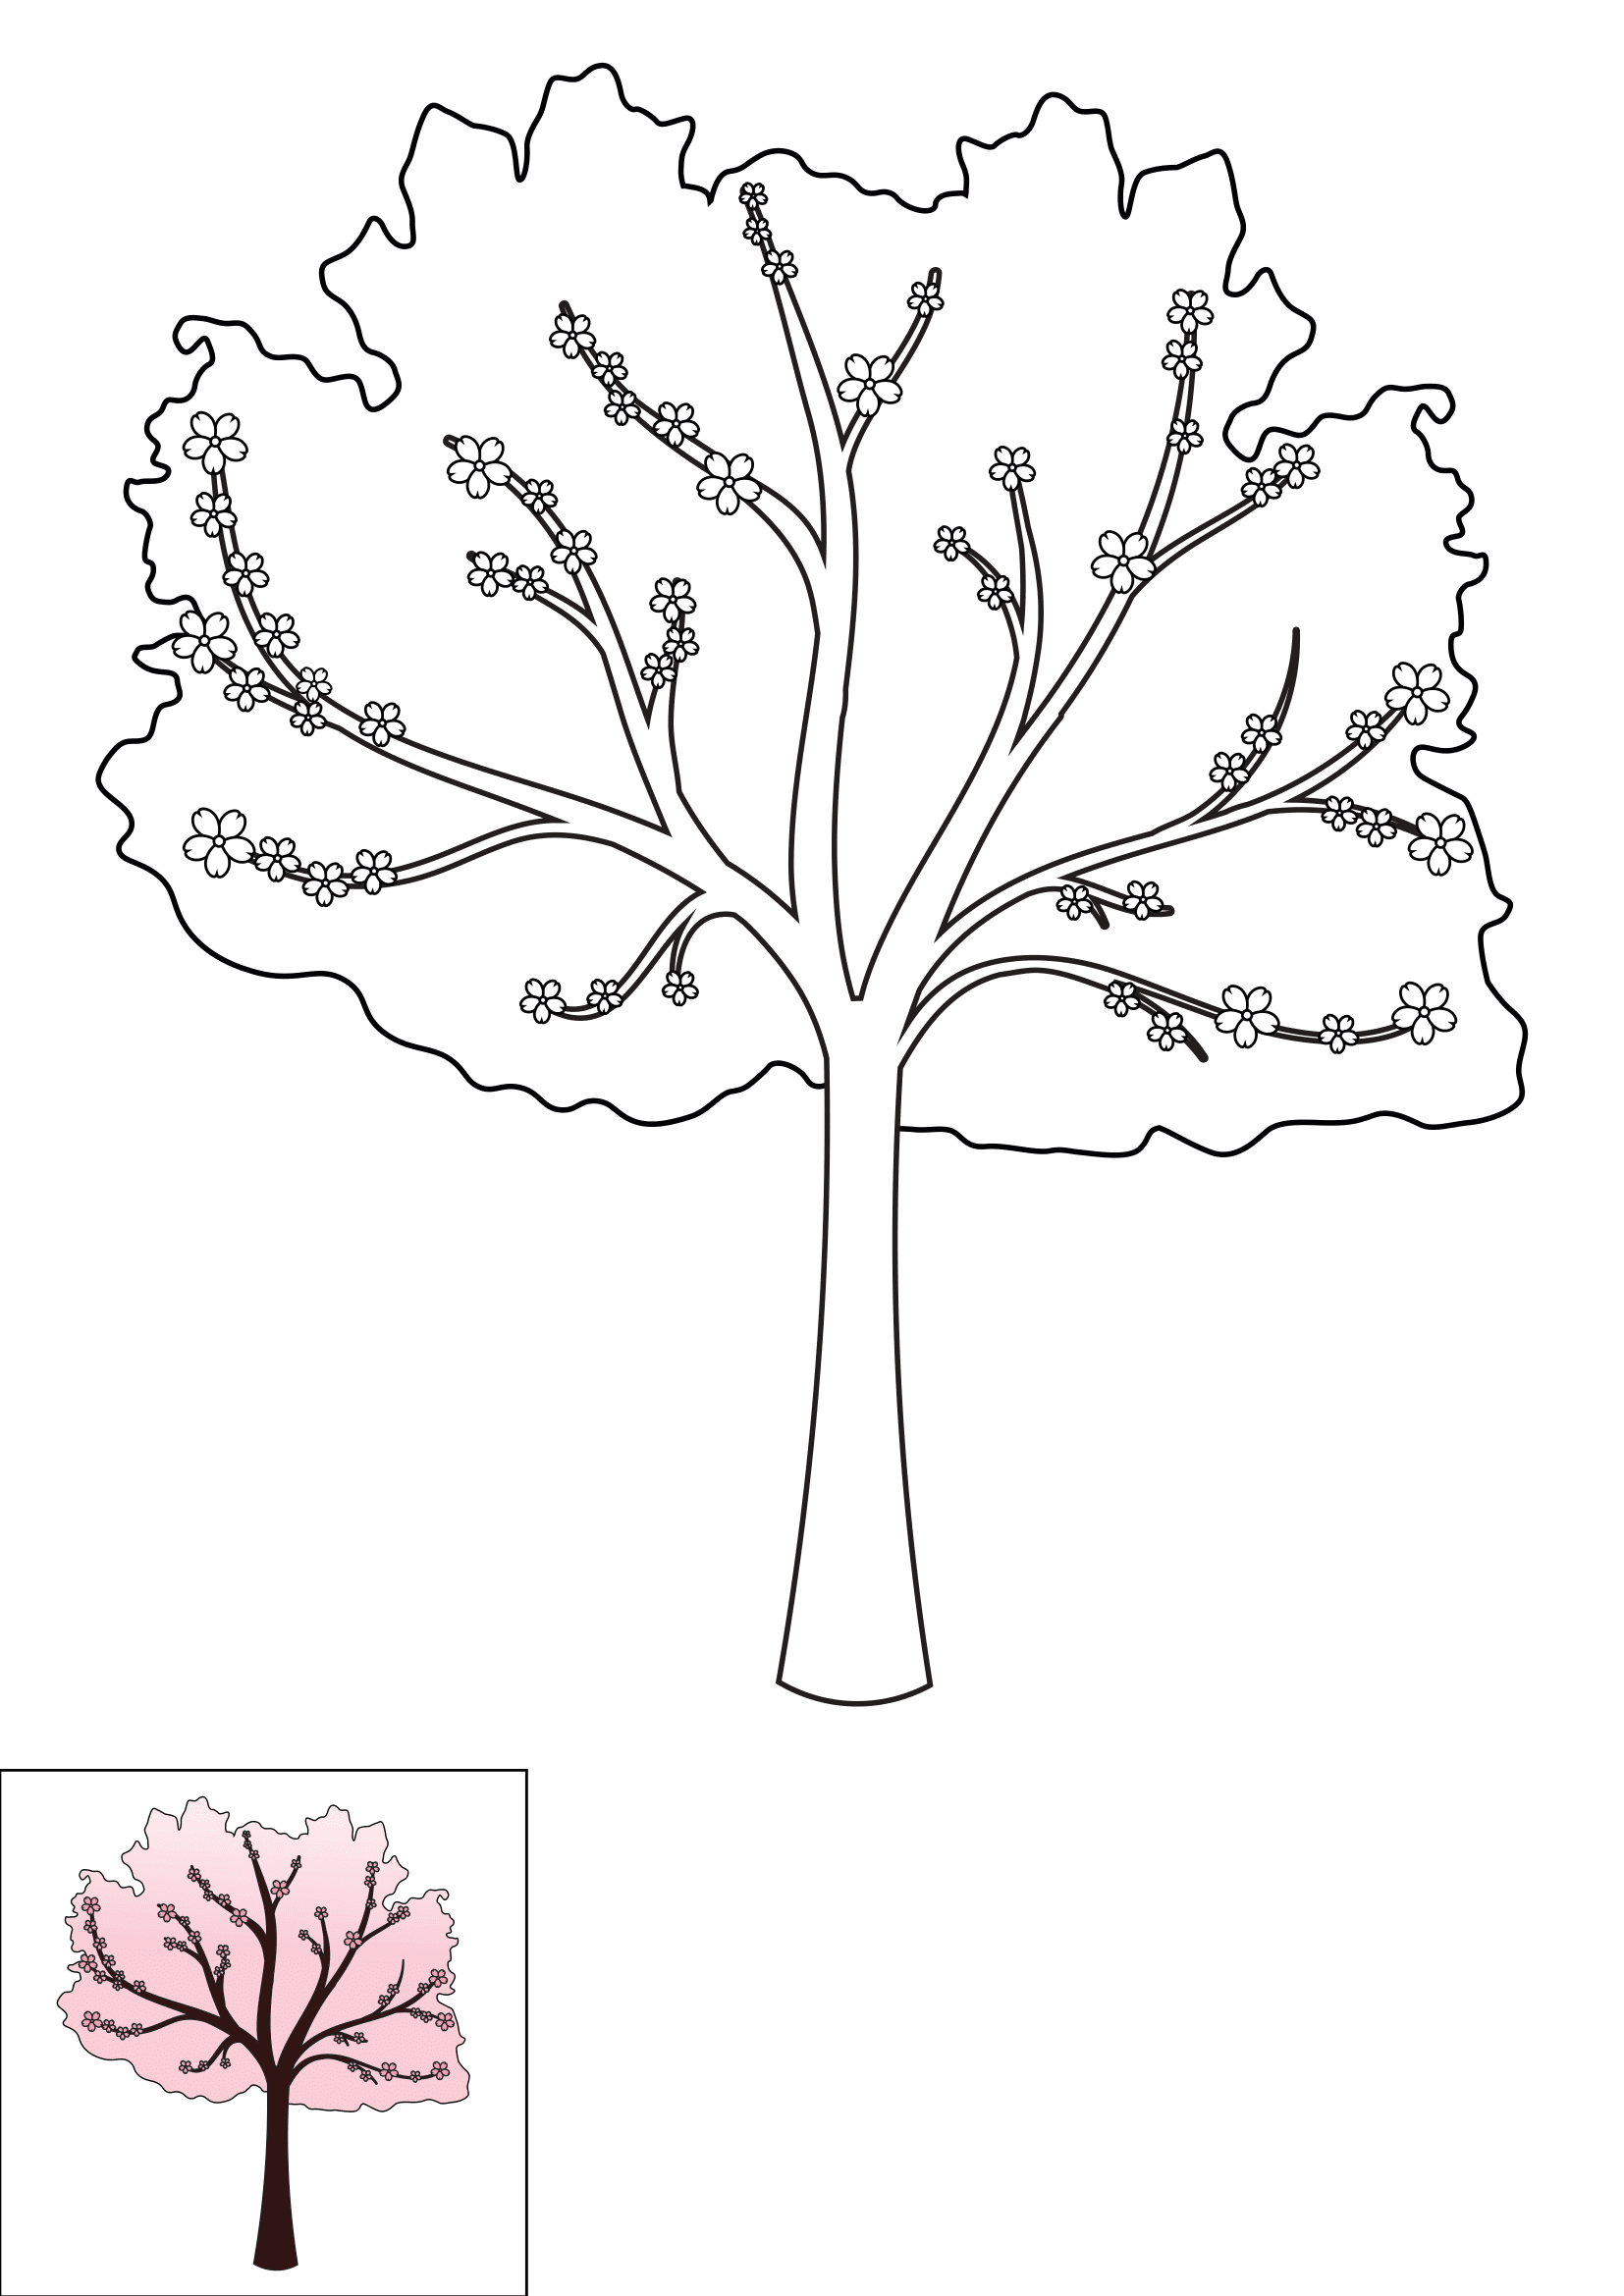 How to Draw A Cherry Blossom Tree Step by Step Printable Color